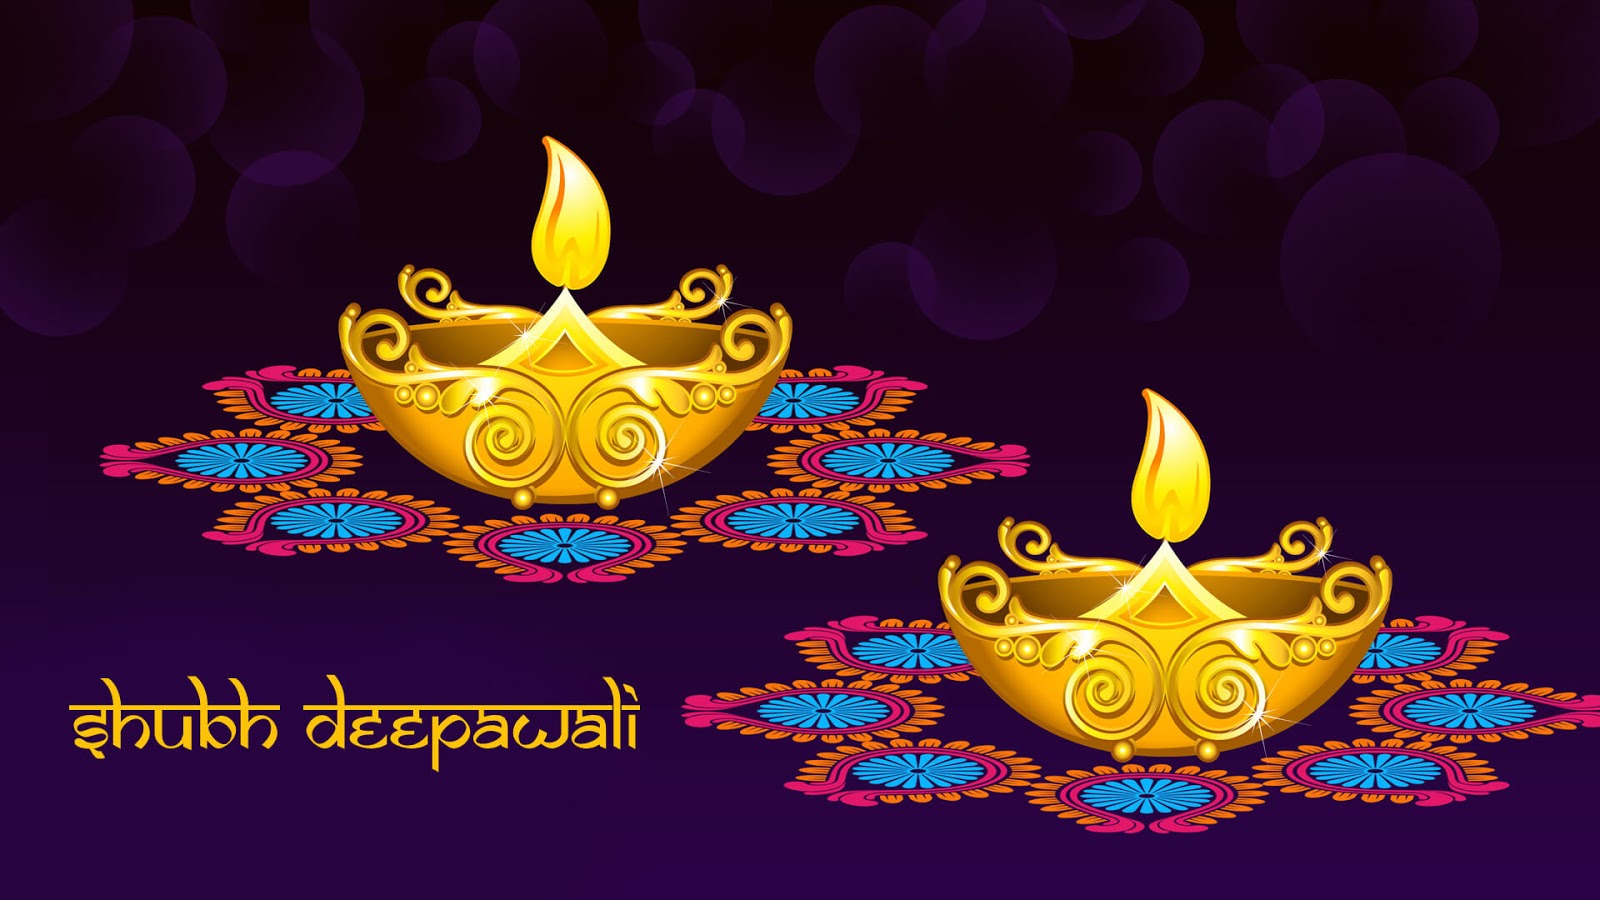 Happy Diwali Images Wallpapers - Happy Diwali Hd Images 2018 , HD Wallpaper & Backgrounds